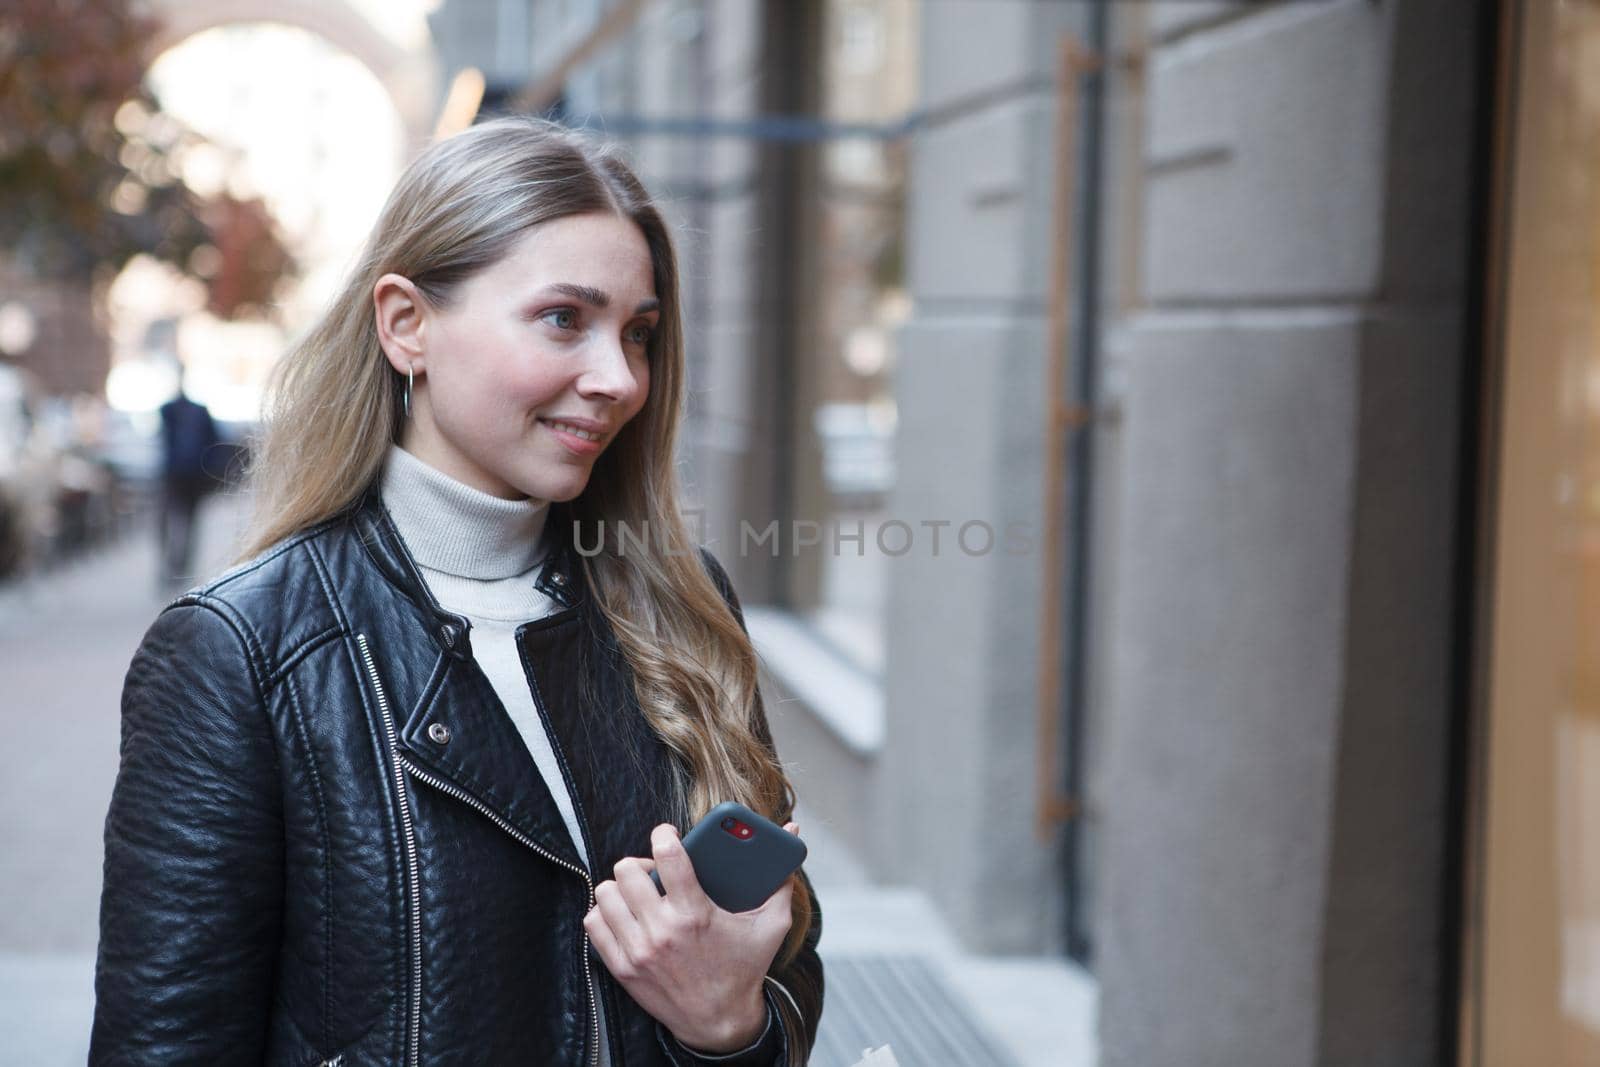 Attractive woman smiling while window shopping in city center